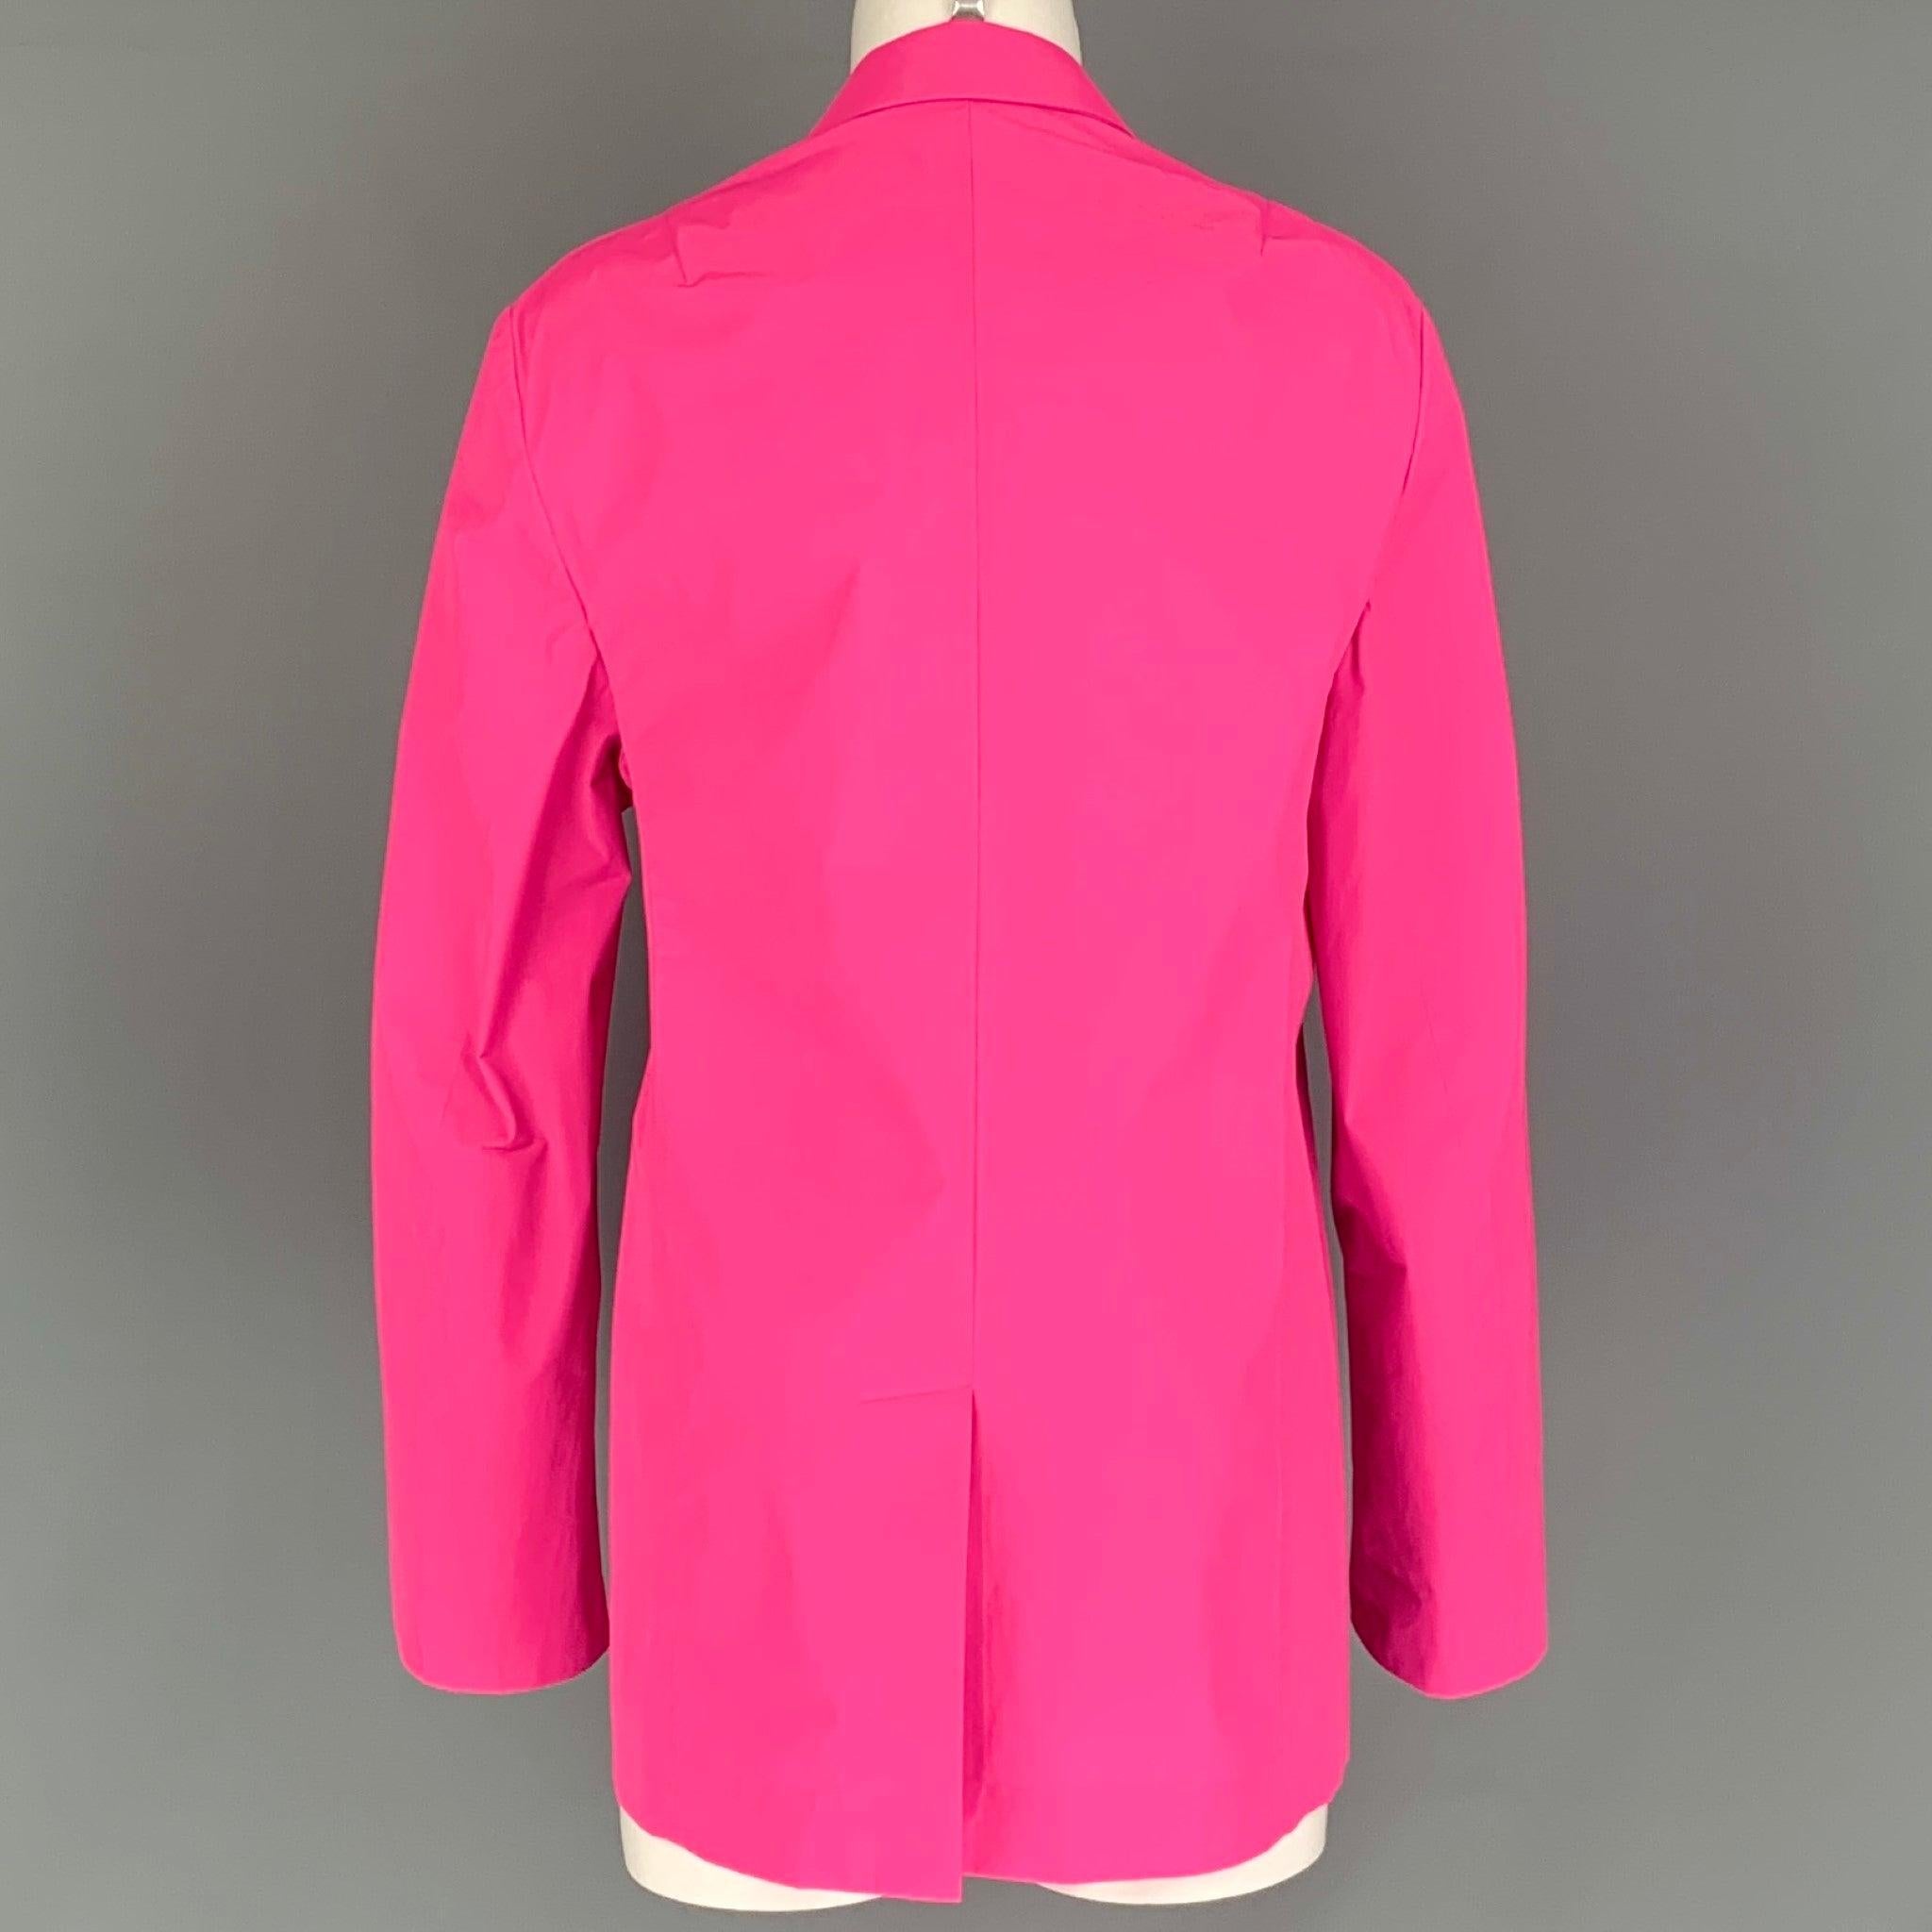 JIL SANDER Pink Polyester Solid Notch Lapel Size M Jacket In Good Condition For Sale In San Francisco, CA